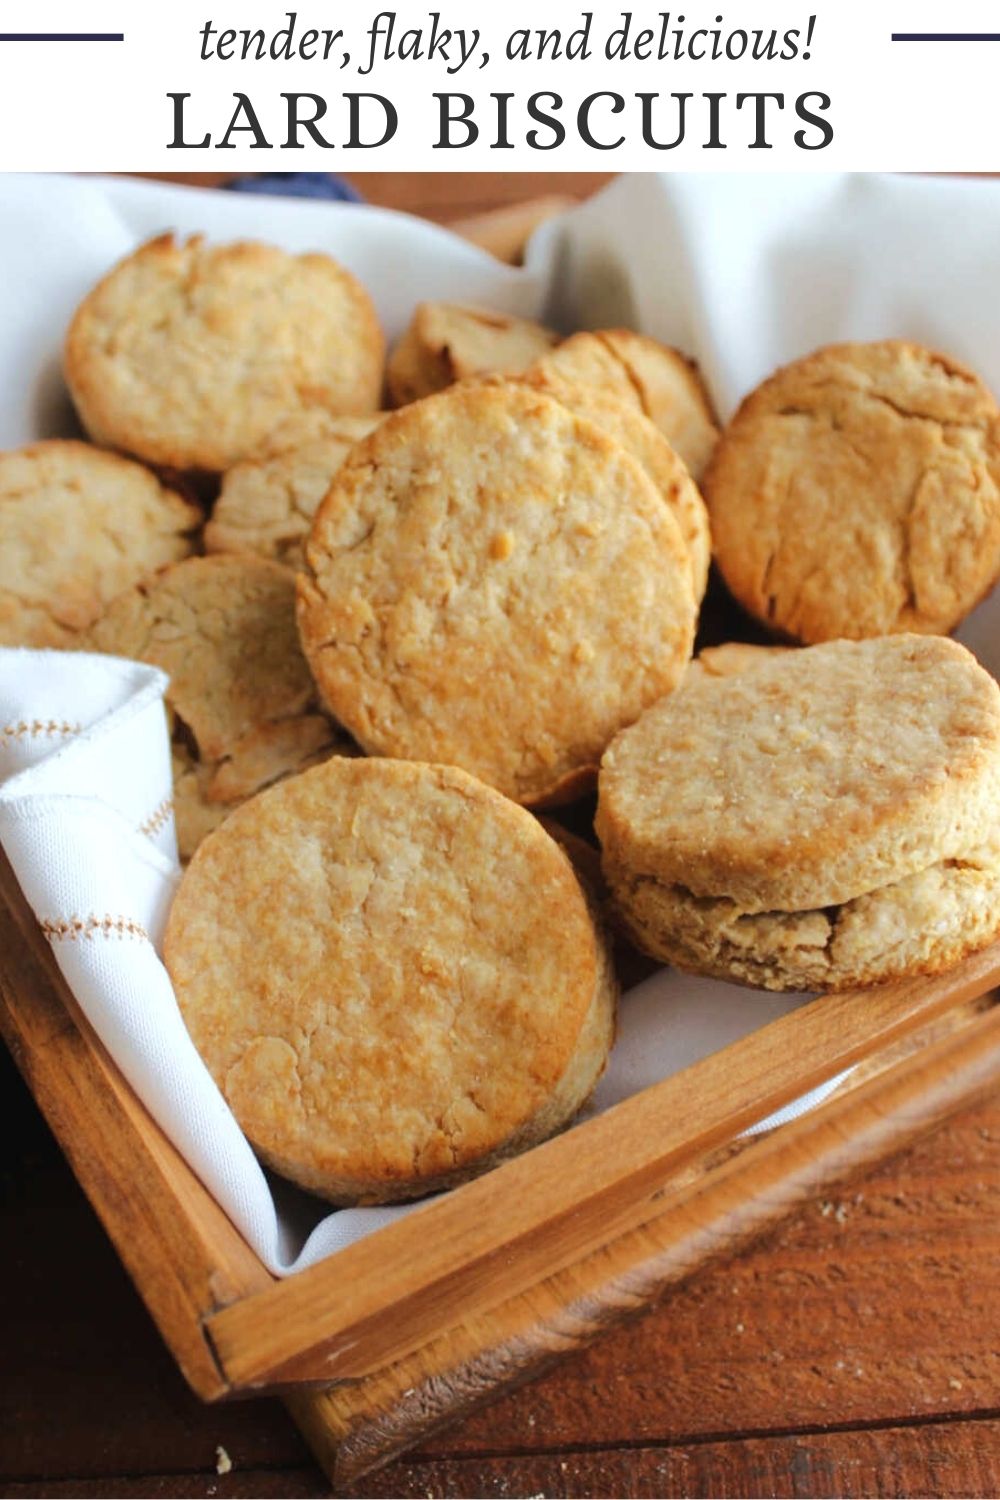 Old fashioned lard biscuits are tender and delicious. Use them to make a breakfast sandwich or top them with butter, jam, or honey for an extra special treat